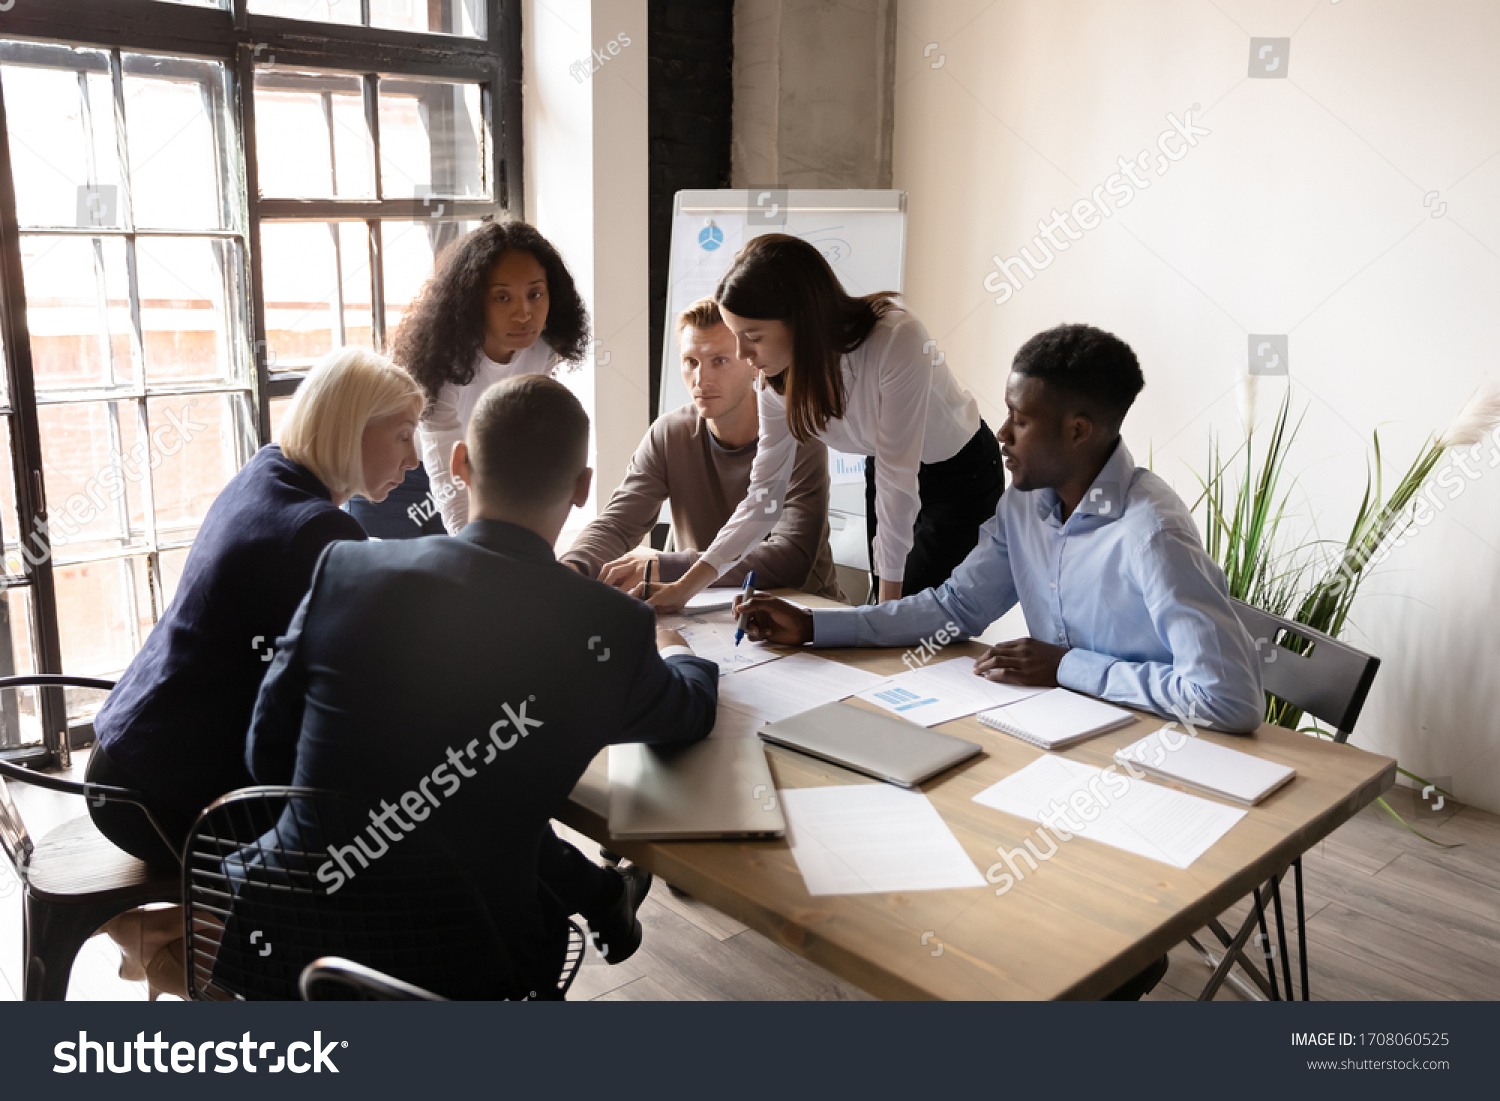 Top view of multicultural colleagues gather at desk in office brainstorm consider paperwork together, diverse employees discuss financial business project ideas at briefing, cooperation concept #1708060525